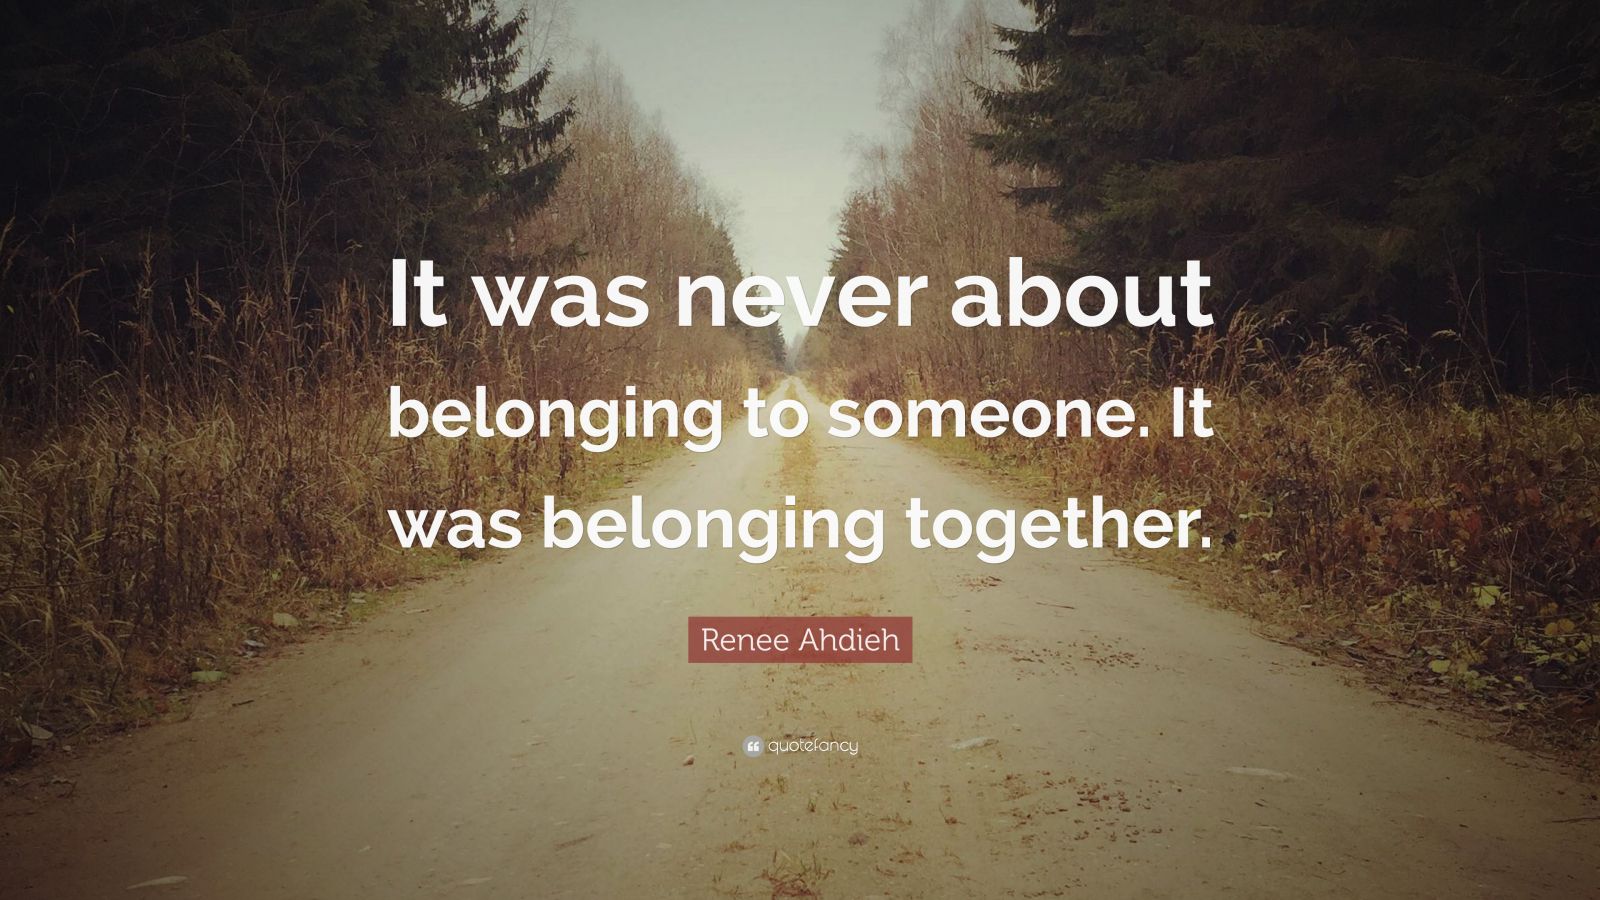 Renee Ahdieh Quote: “It was never about belonging to someone. It was